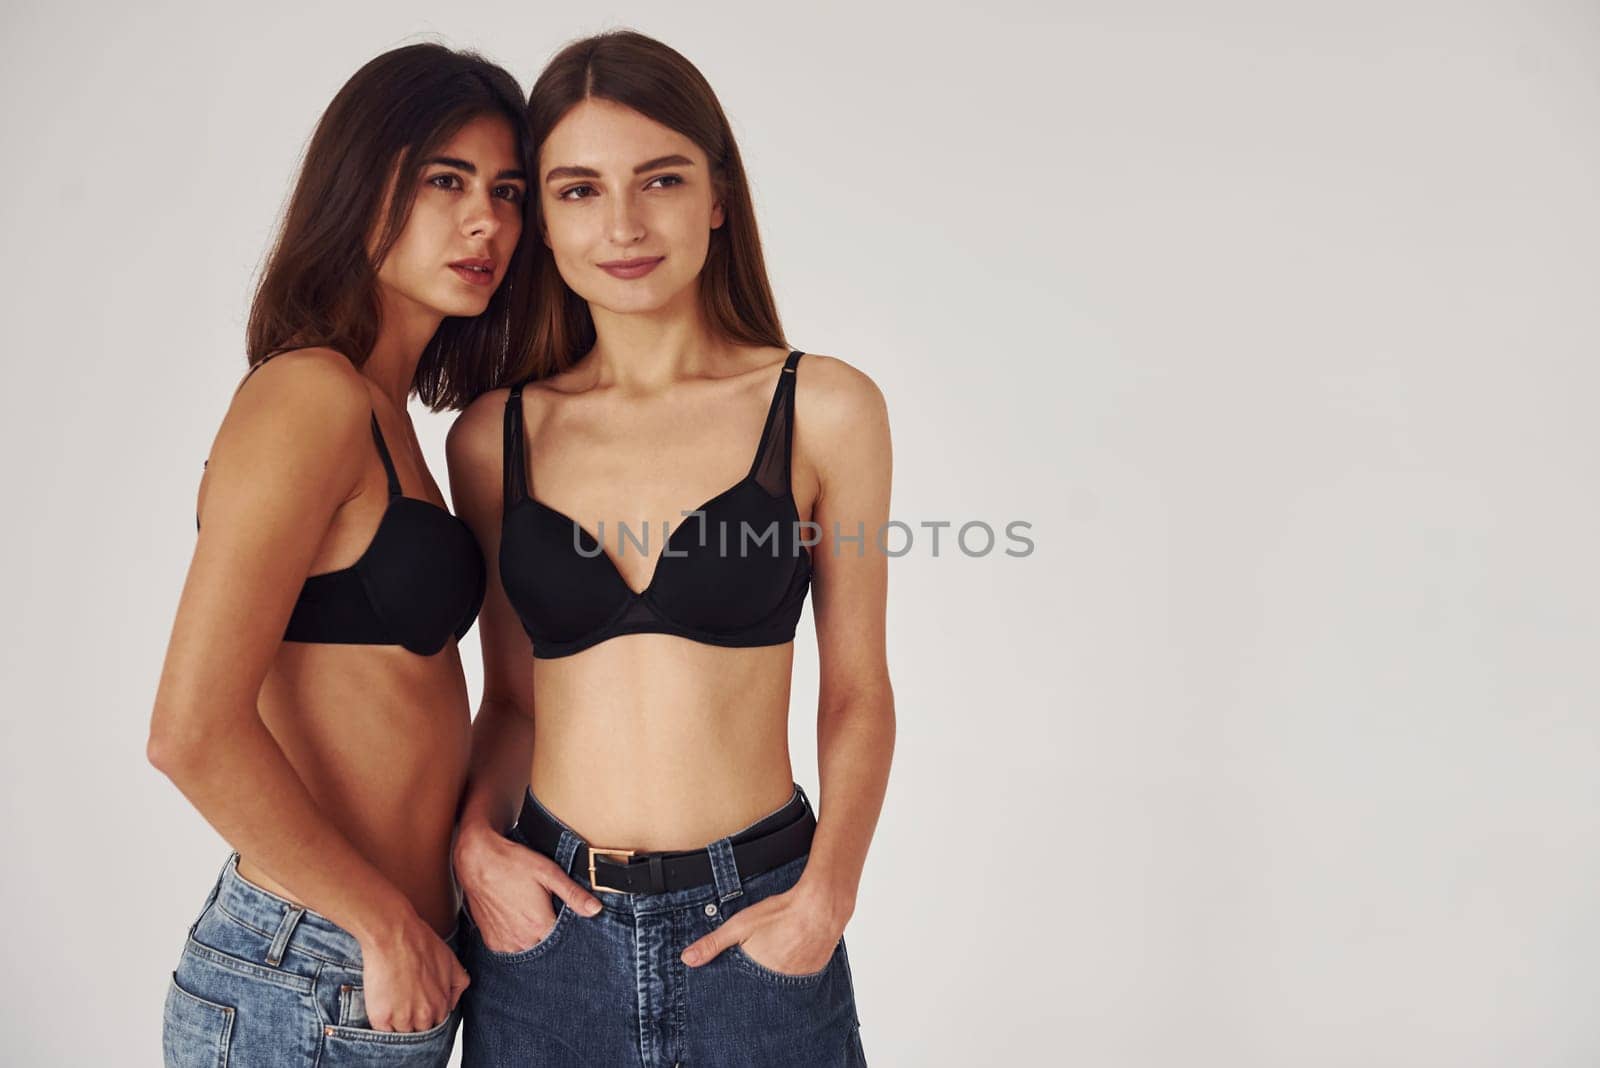 Two young women in lingerie together indoors. White background by Standret